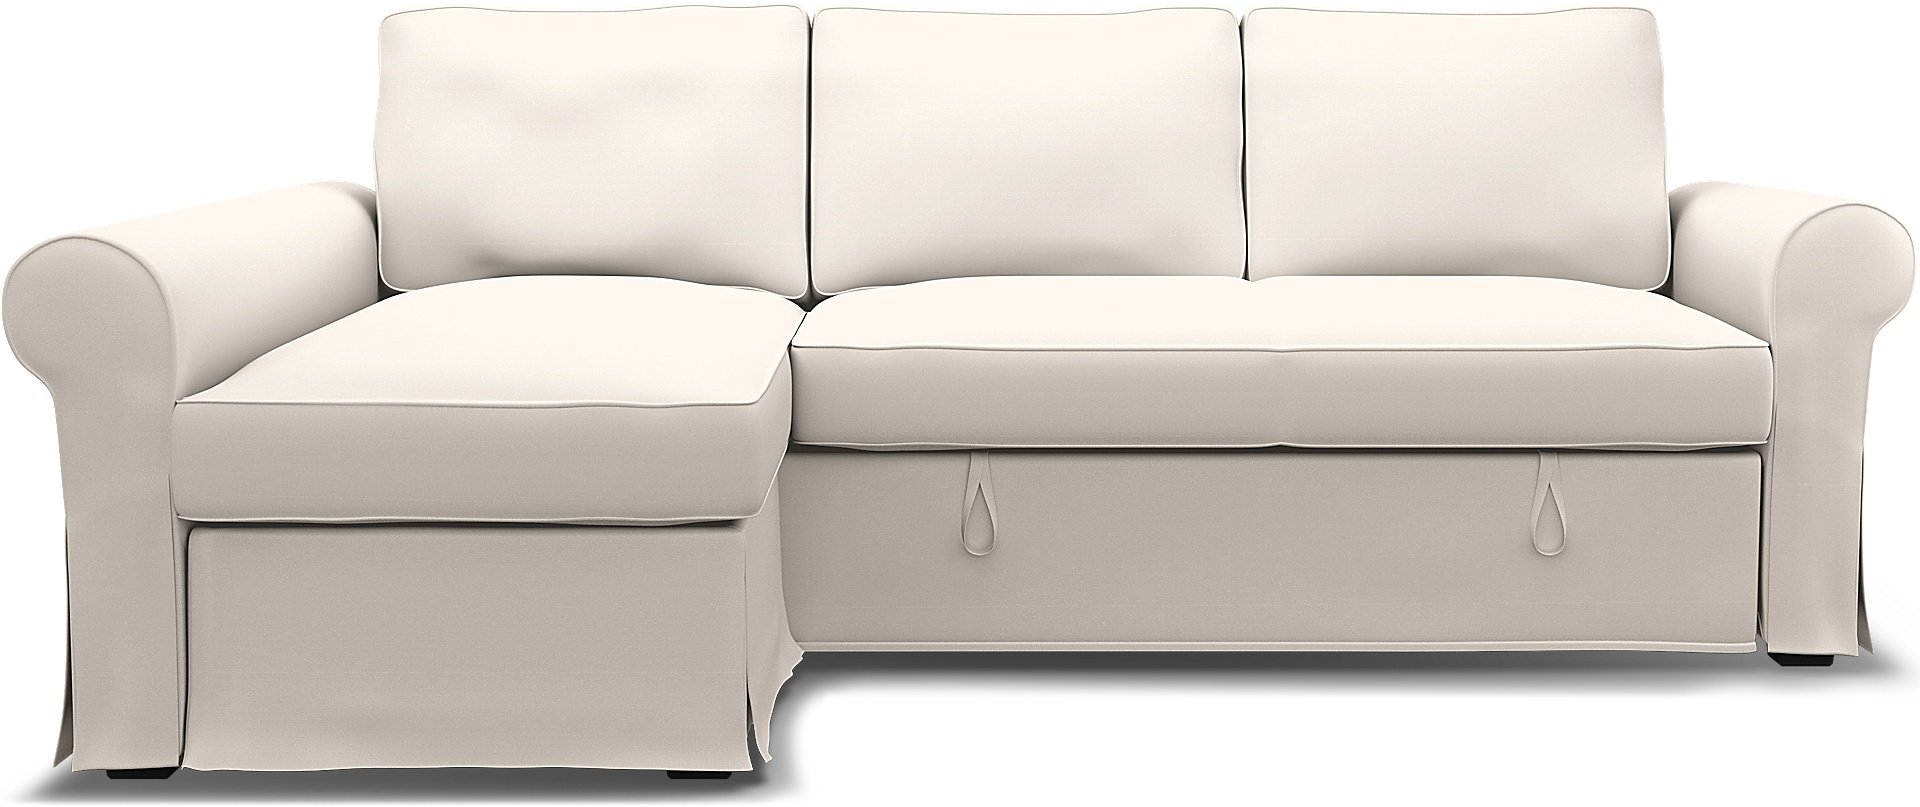 IKEA - Backabro Sofabed with Chaise Cover, Soft White, Cotton - Bemz